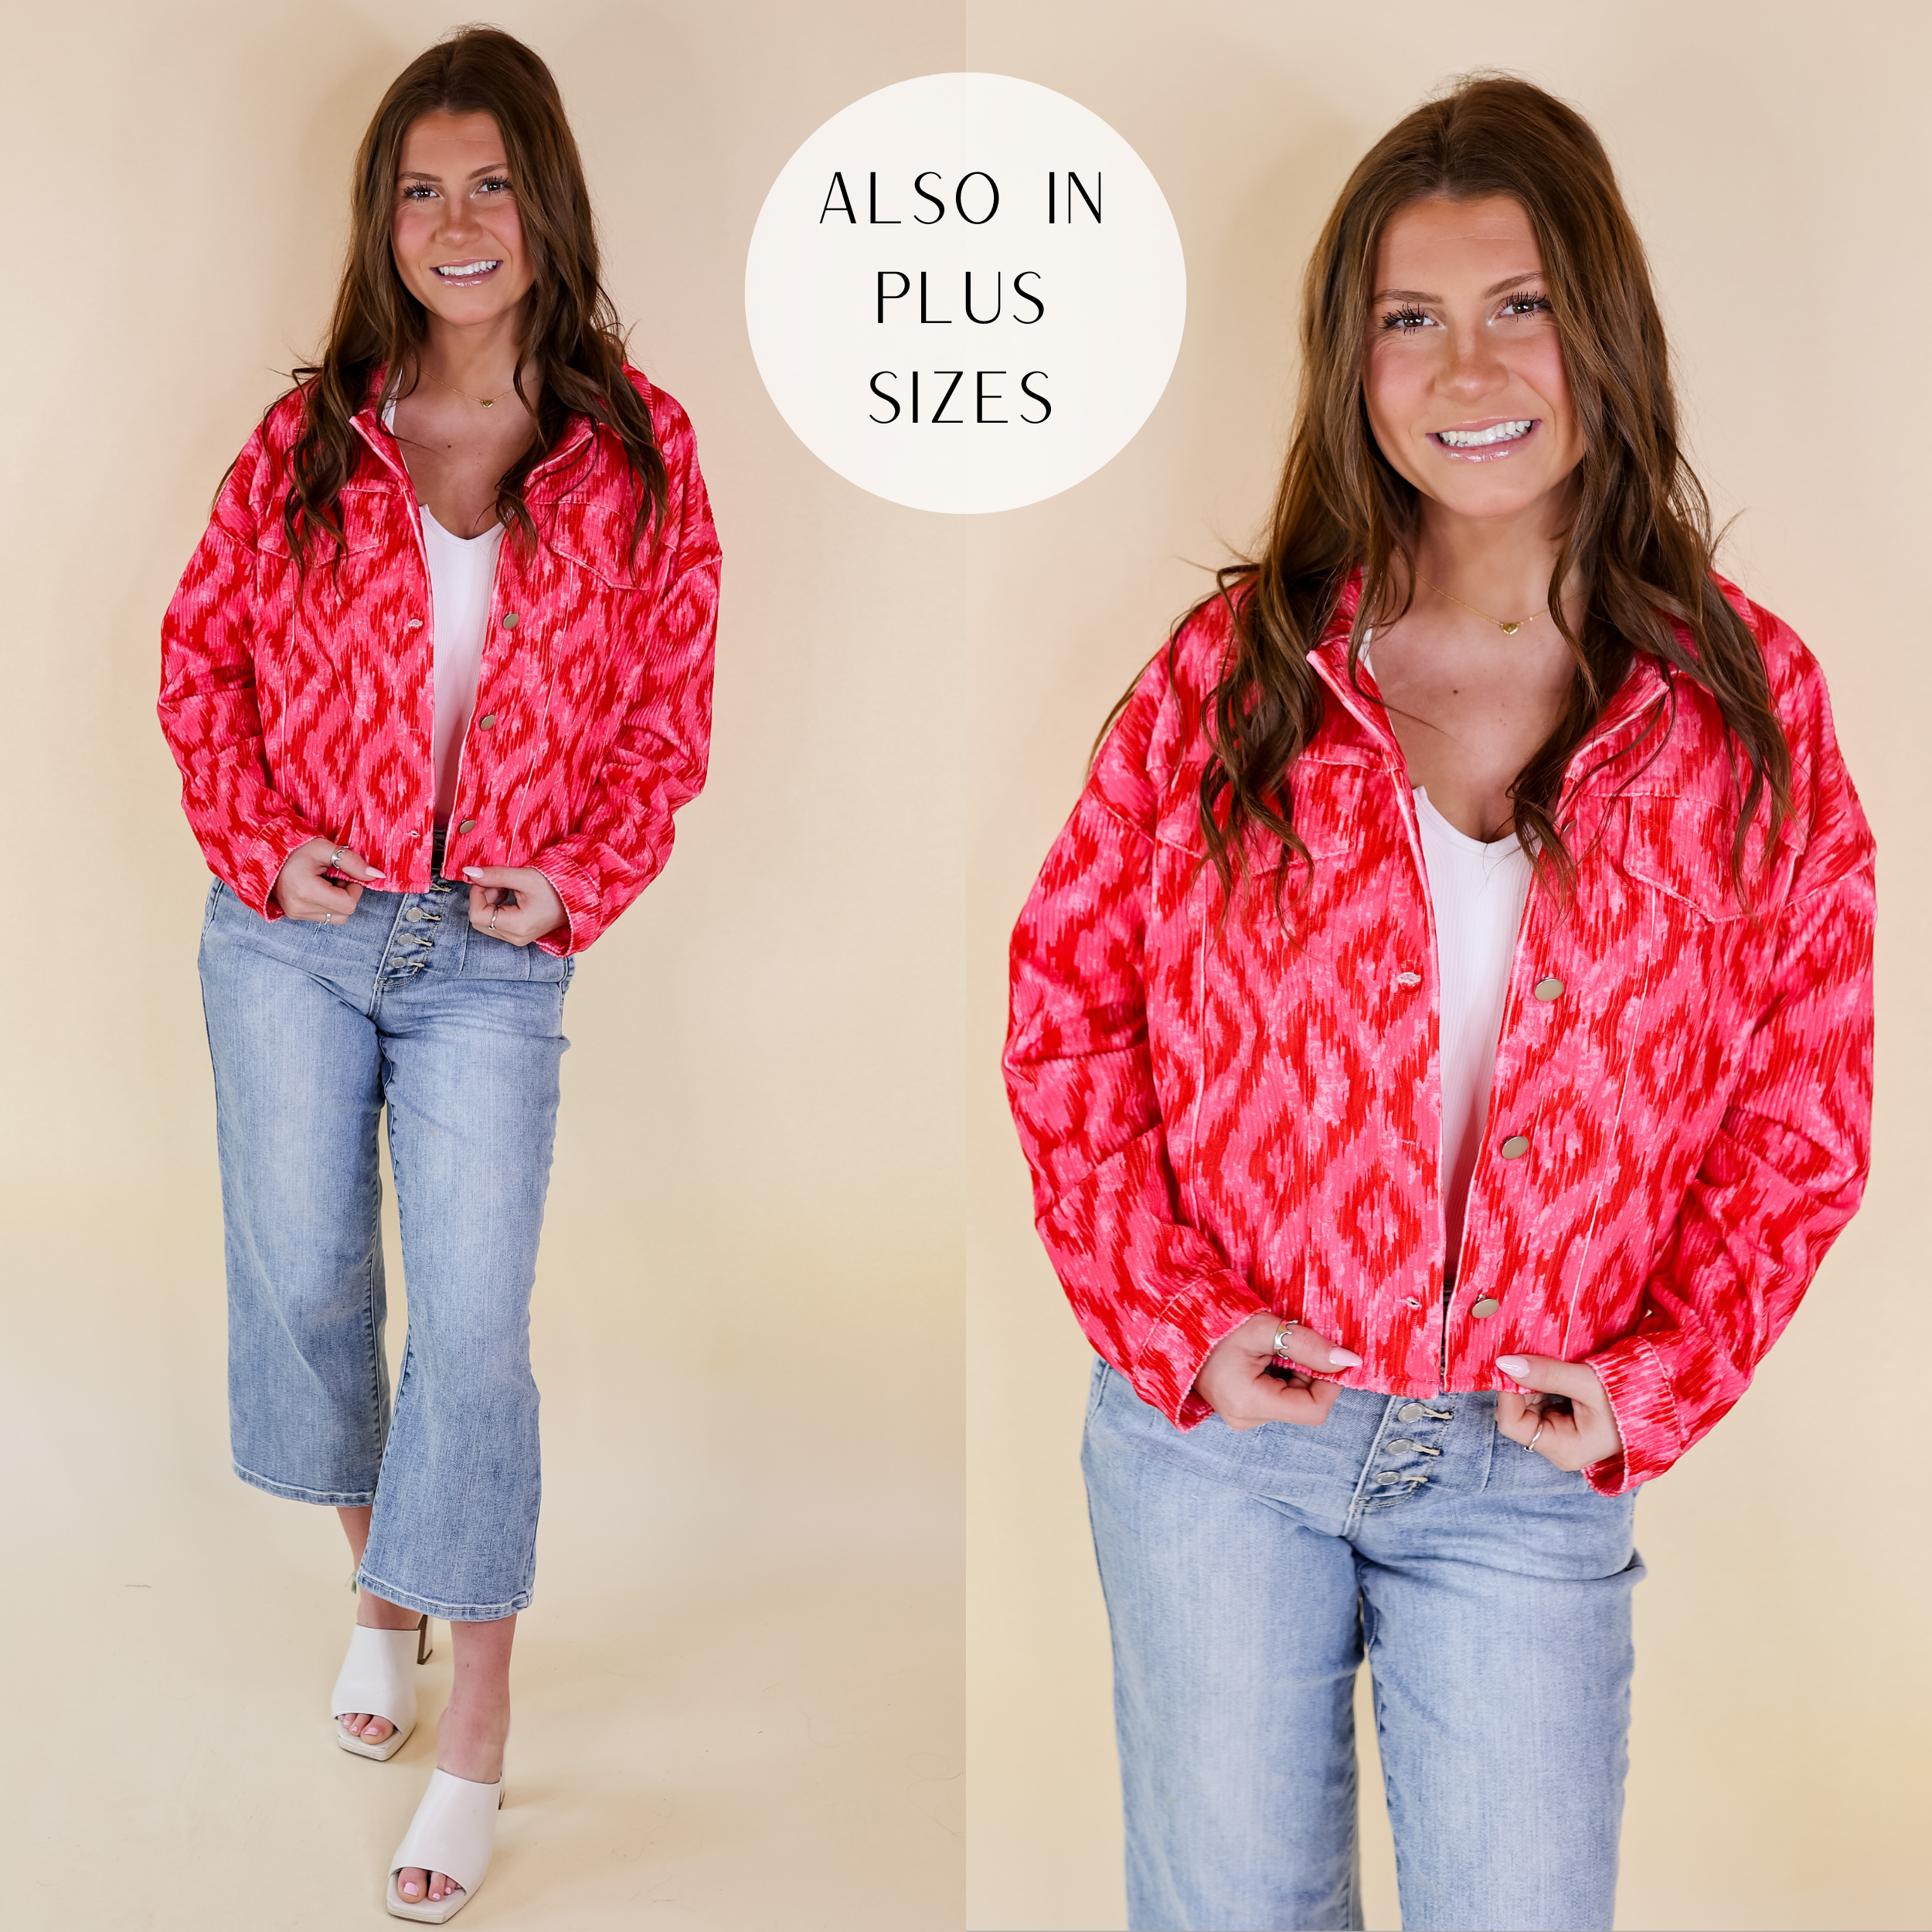 Stay Sweet Mosaic Print Corduroy Jacket with Crystal Fringe Back in Pink and Red - Giddy Up Glamour Boutique